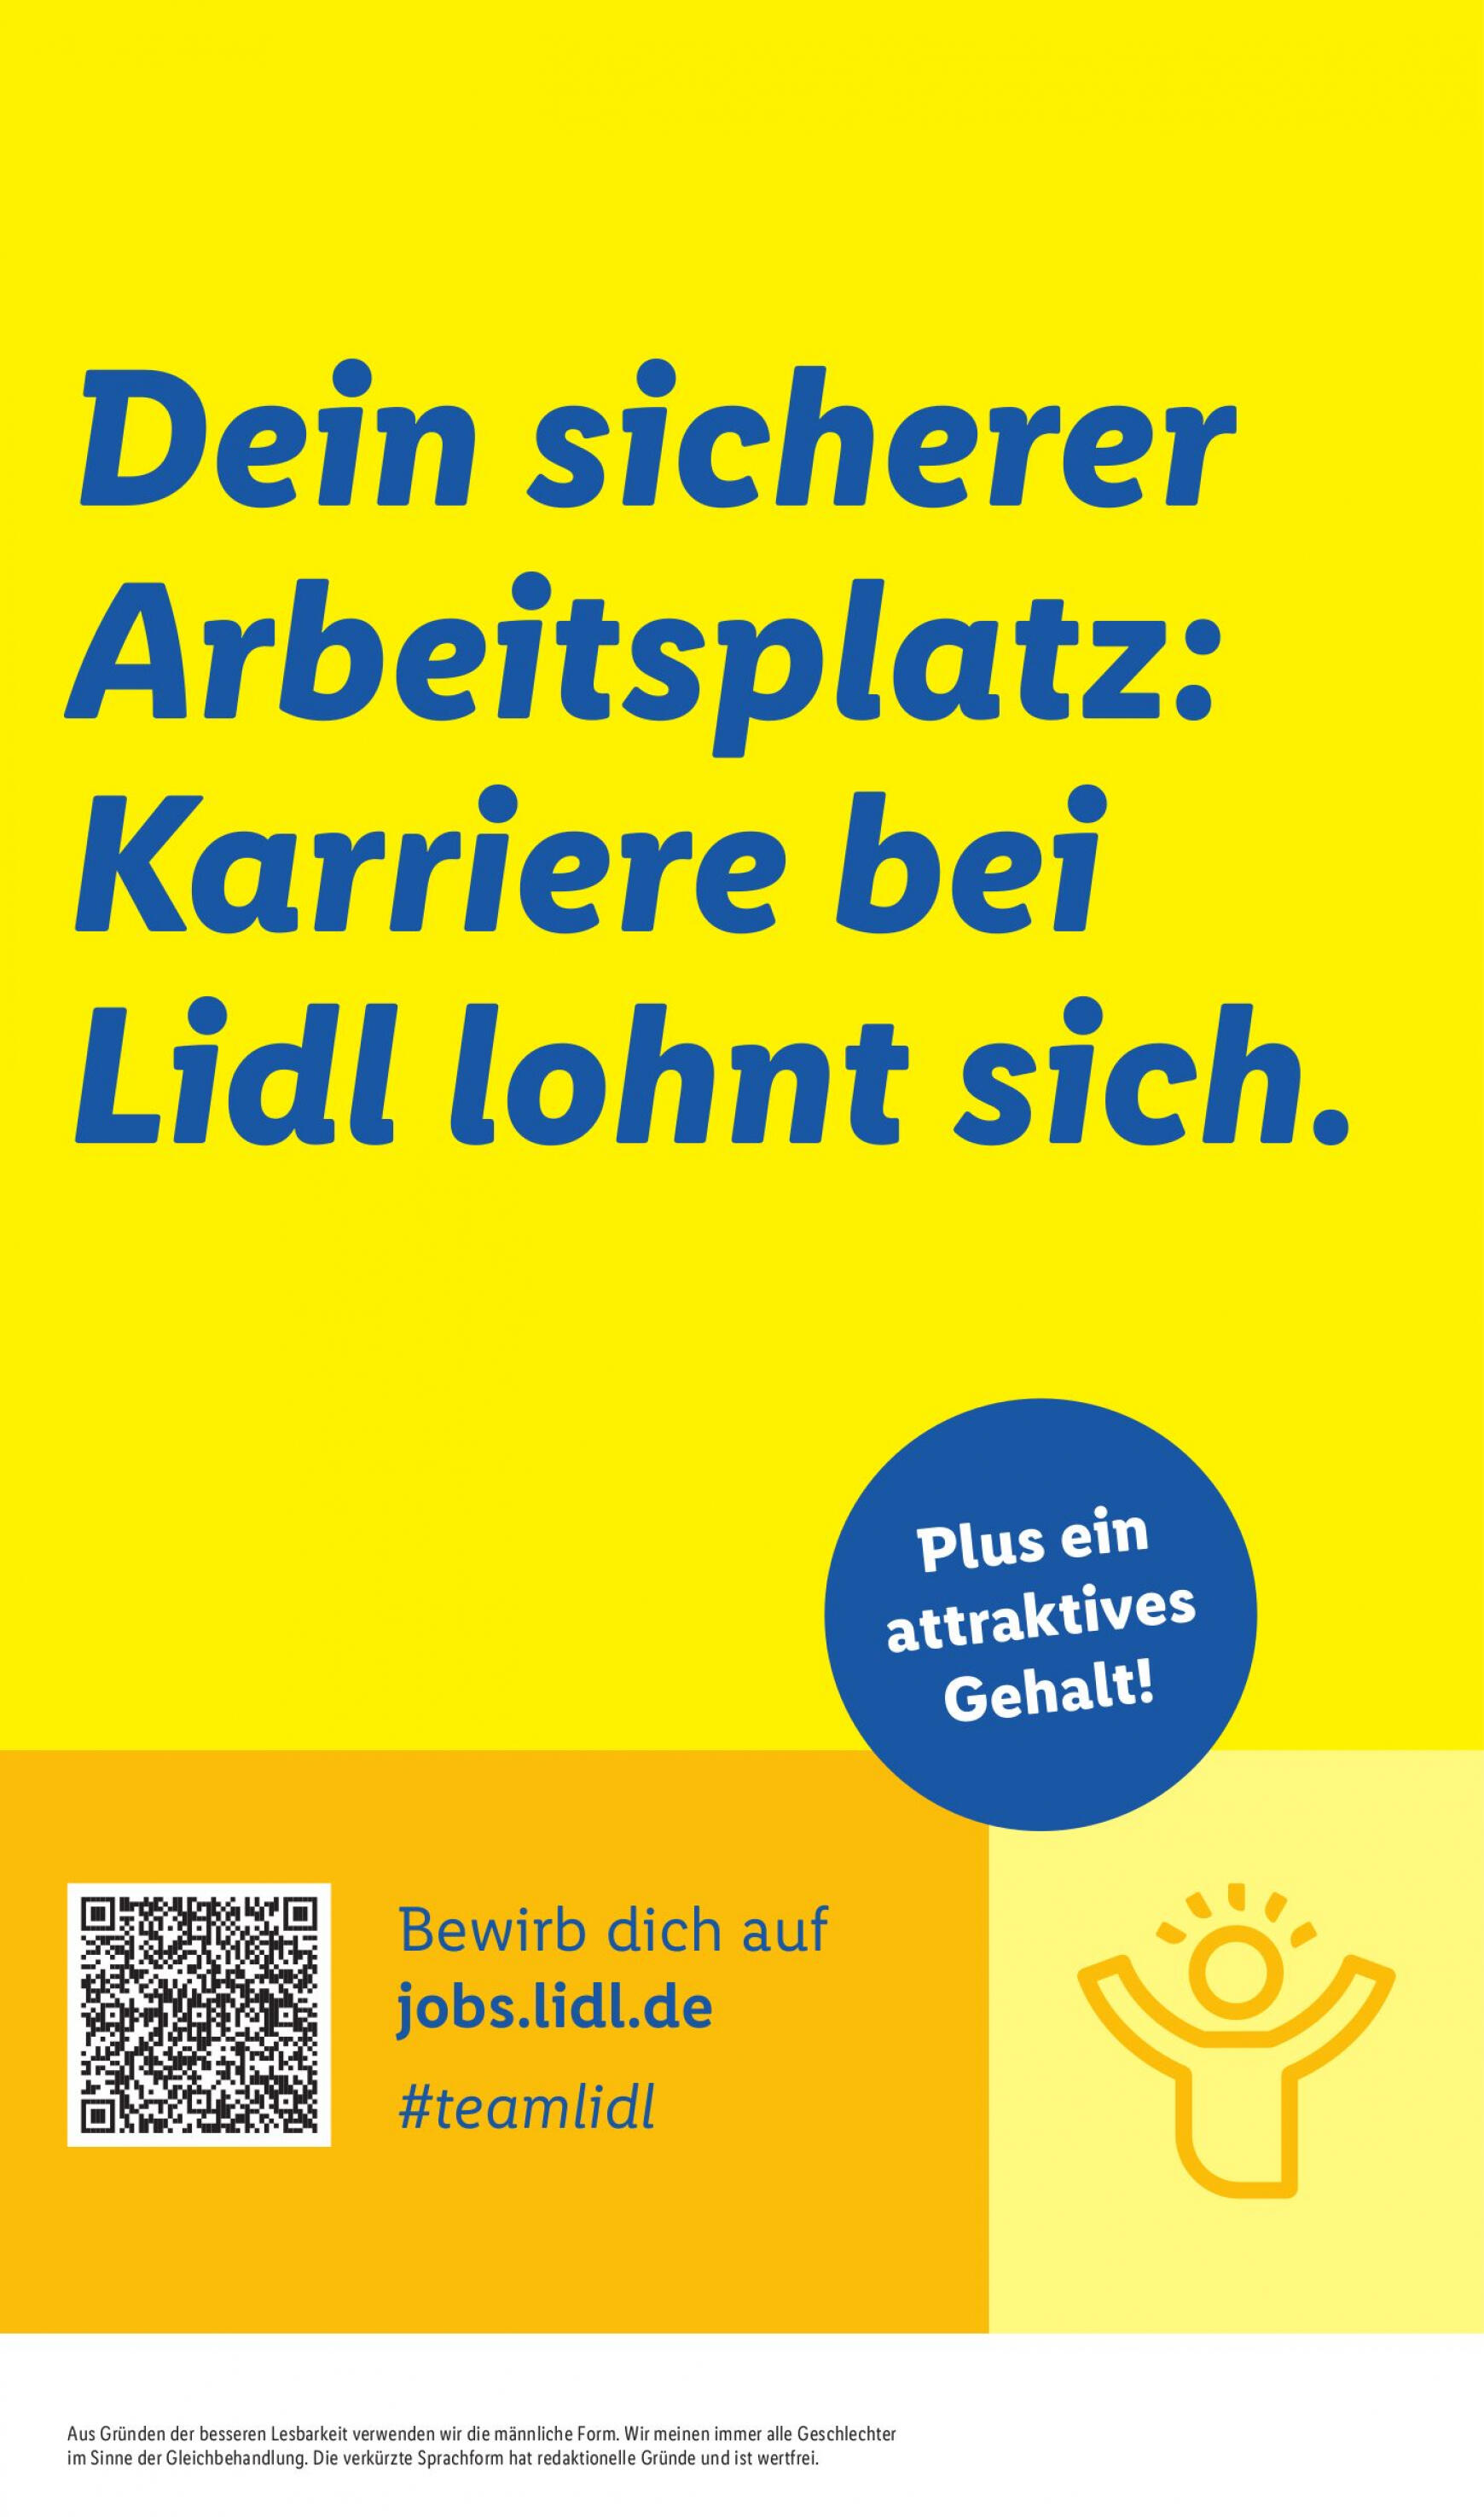 lidl - Flyer Lidl aktuell 06.05. - 11.05. - page: 47